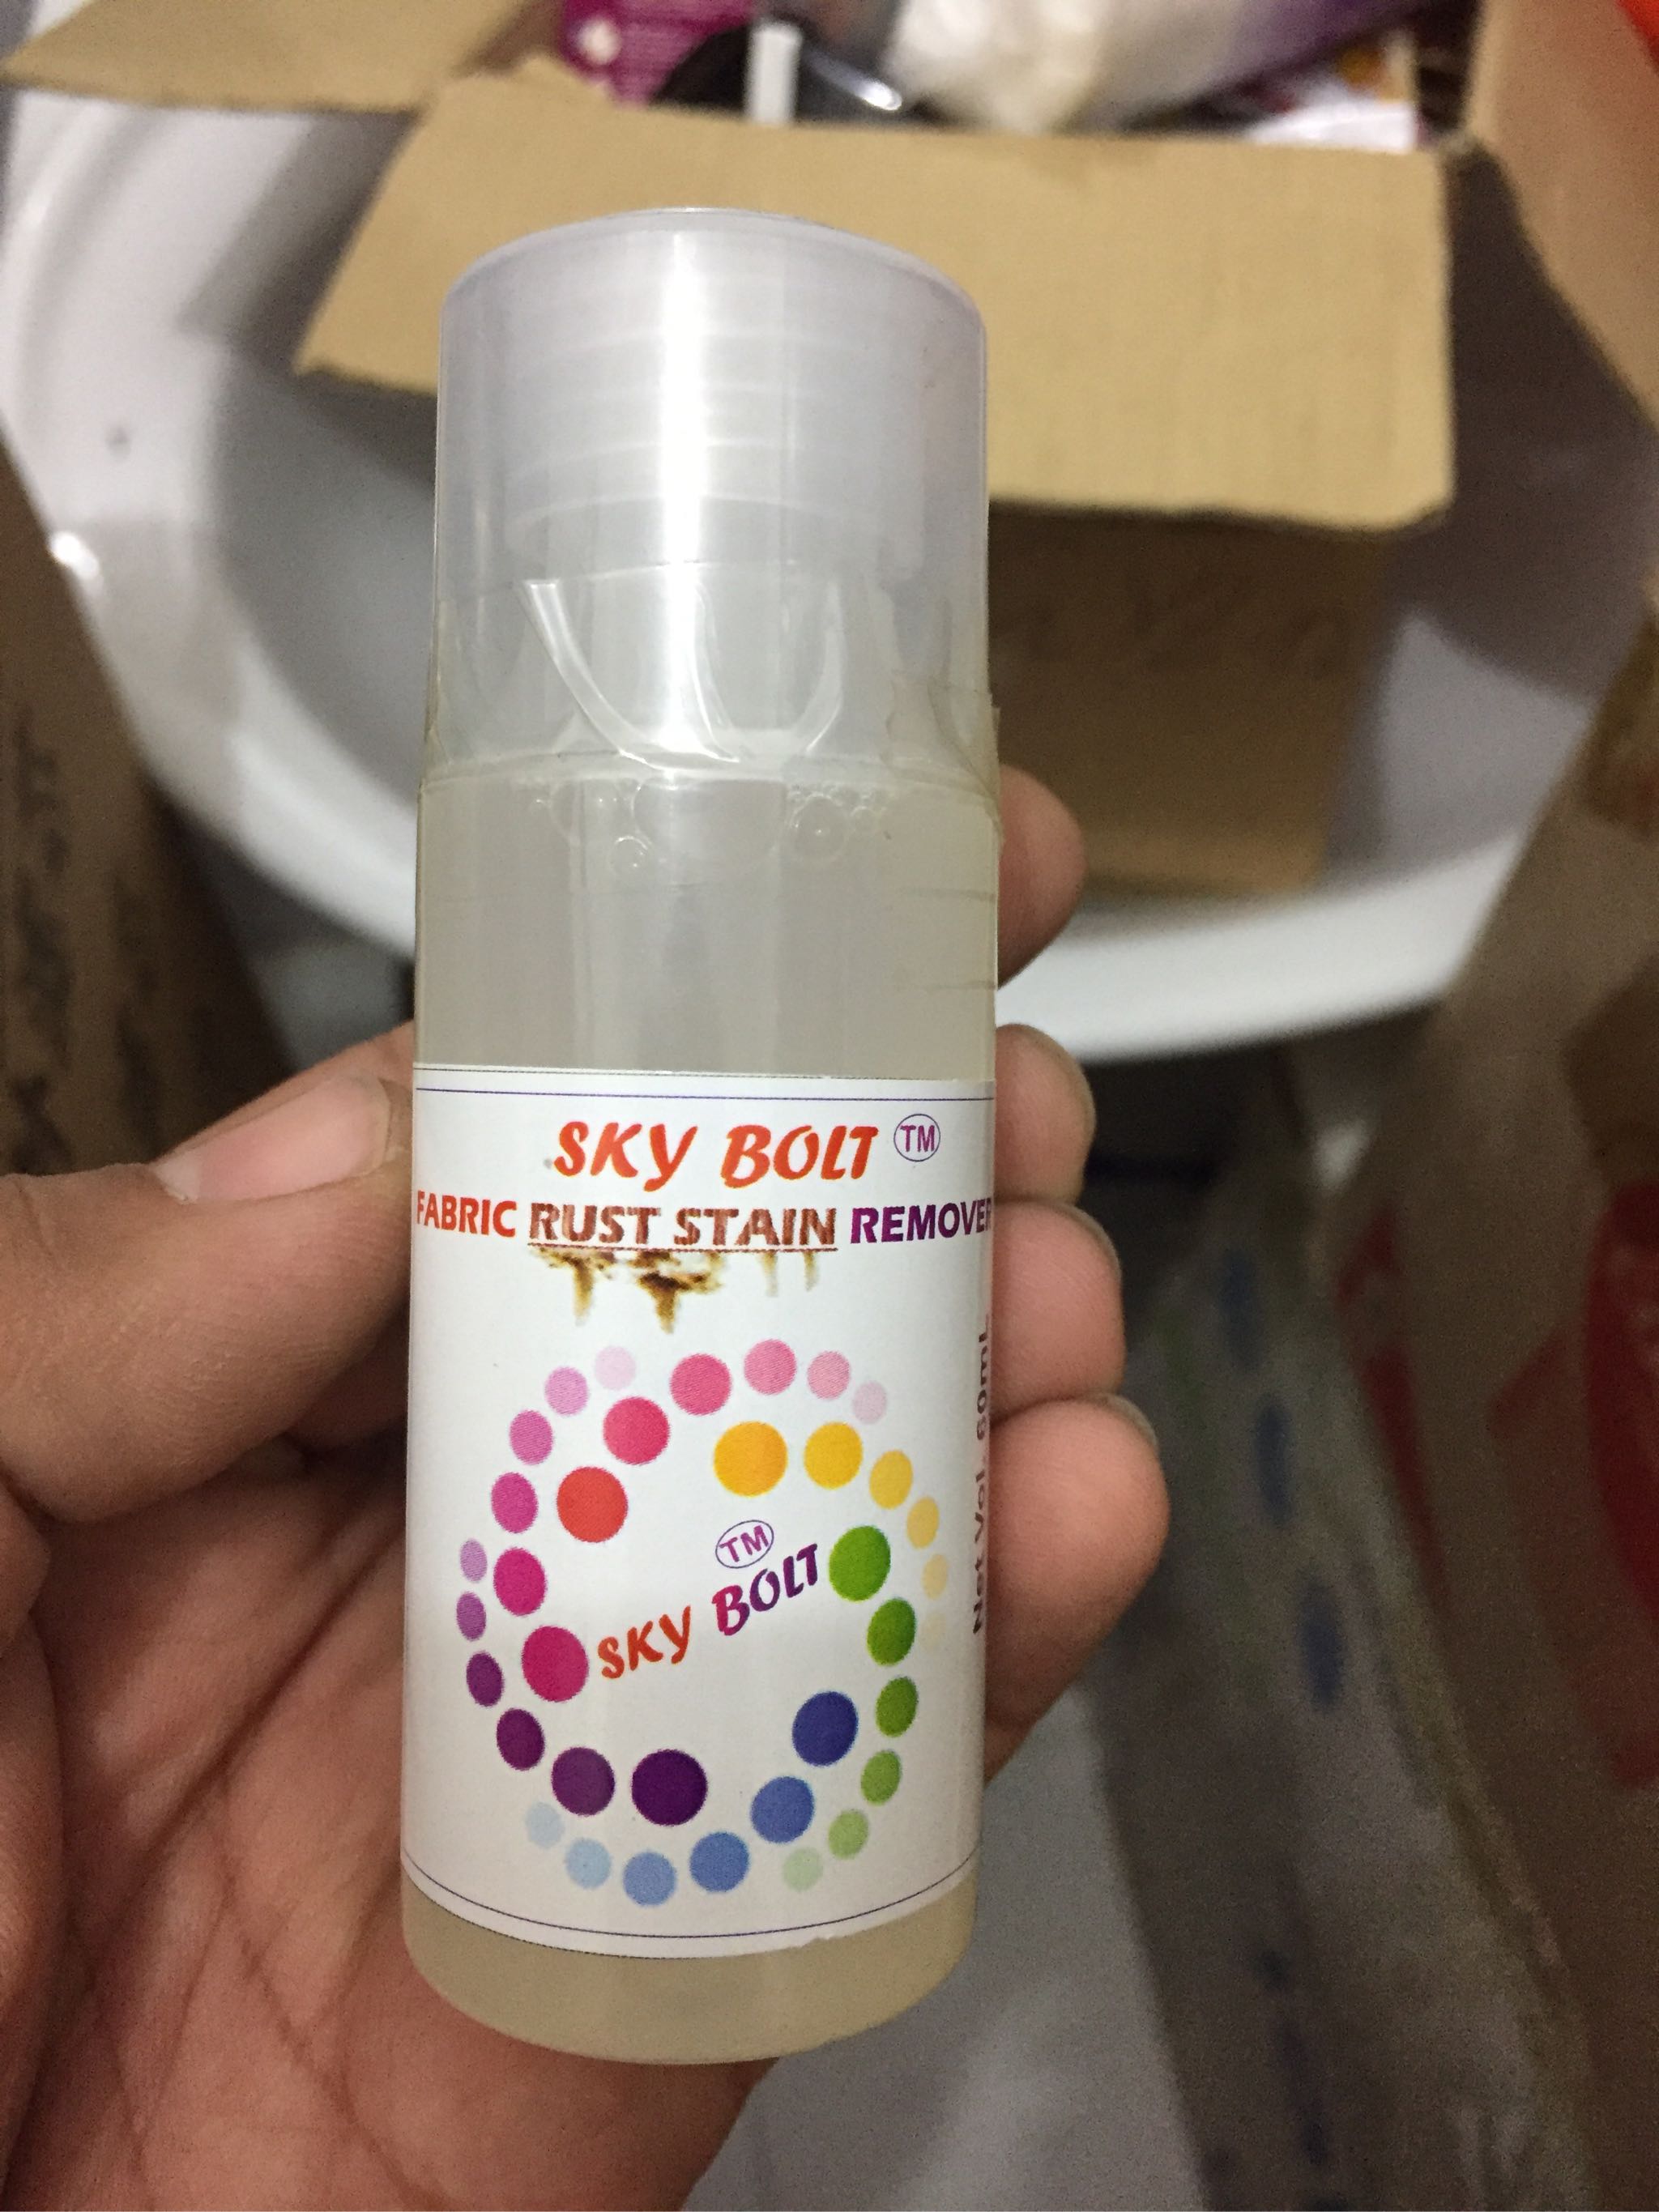 SKY BOLT RUST STAIN REMOVER, FABRIC RUST STAIN REMOVER, STAIN CLEANER